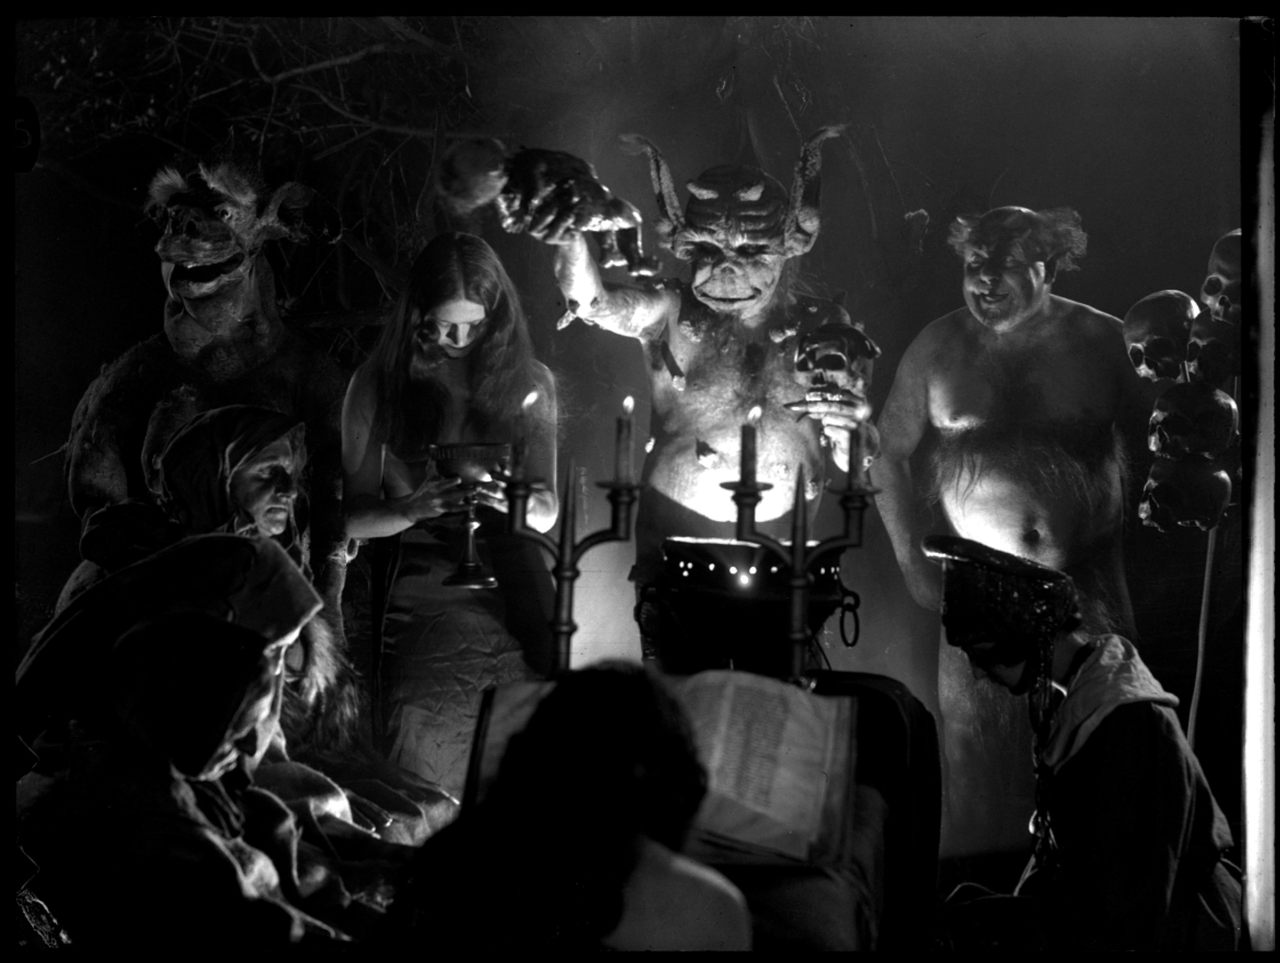 Scenes of grave robbing, demonic possession, torture, and general salaciousness dominated 1922's <em>Häxan</em>, an early documentary that lives on more than a century later as a cult classic.